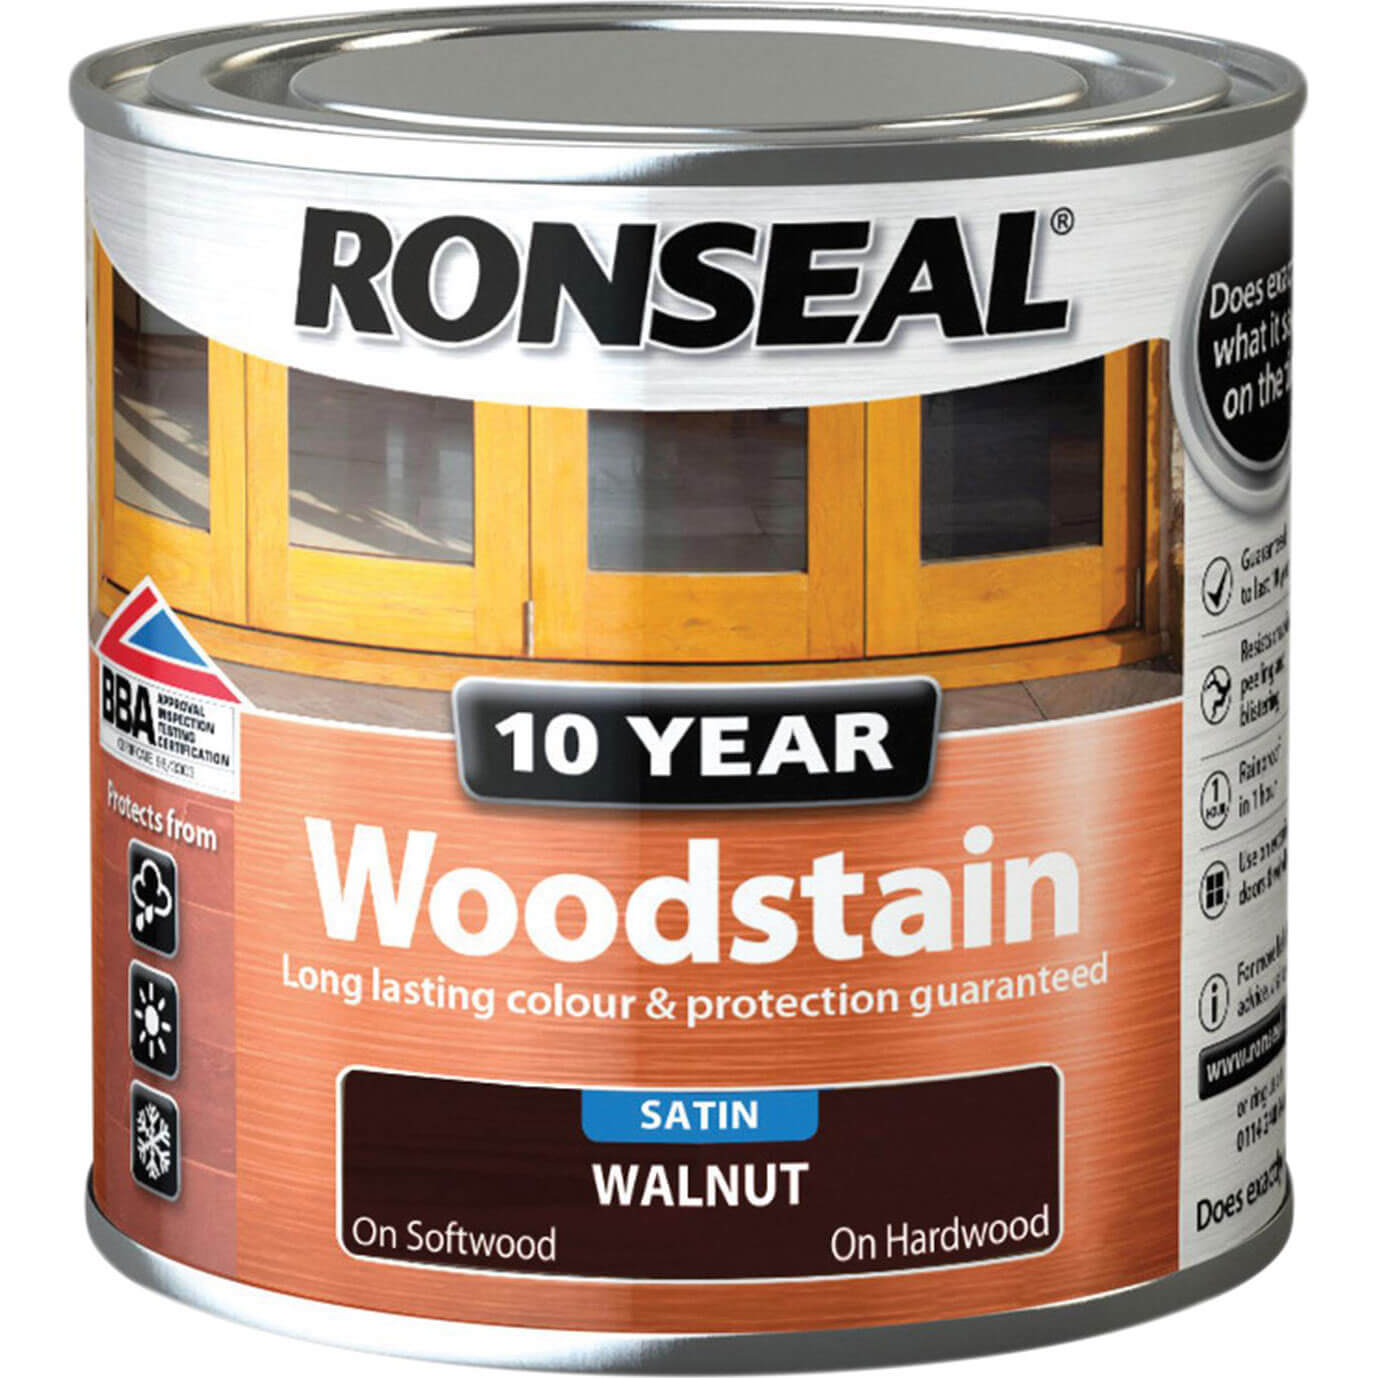 Image of Ronseal 10 Year Wood Stain Walnut 250ml